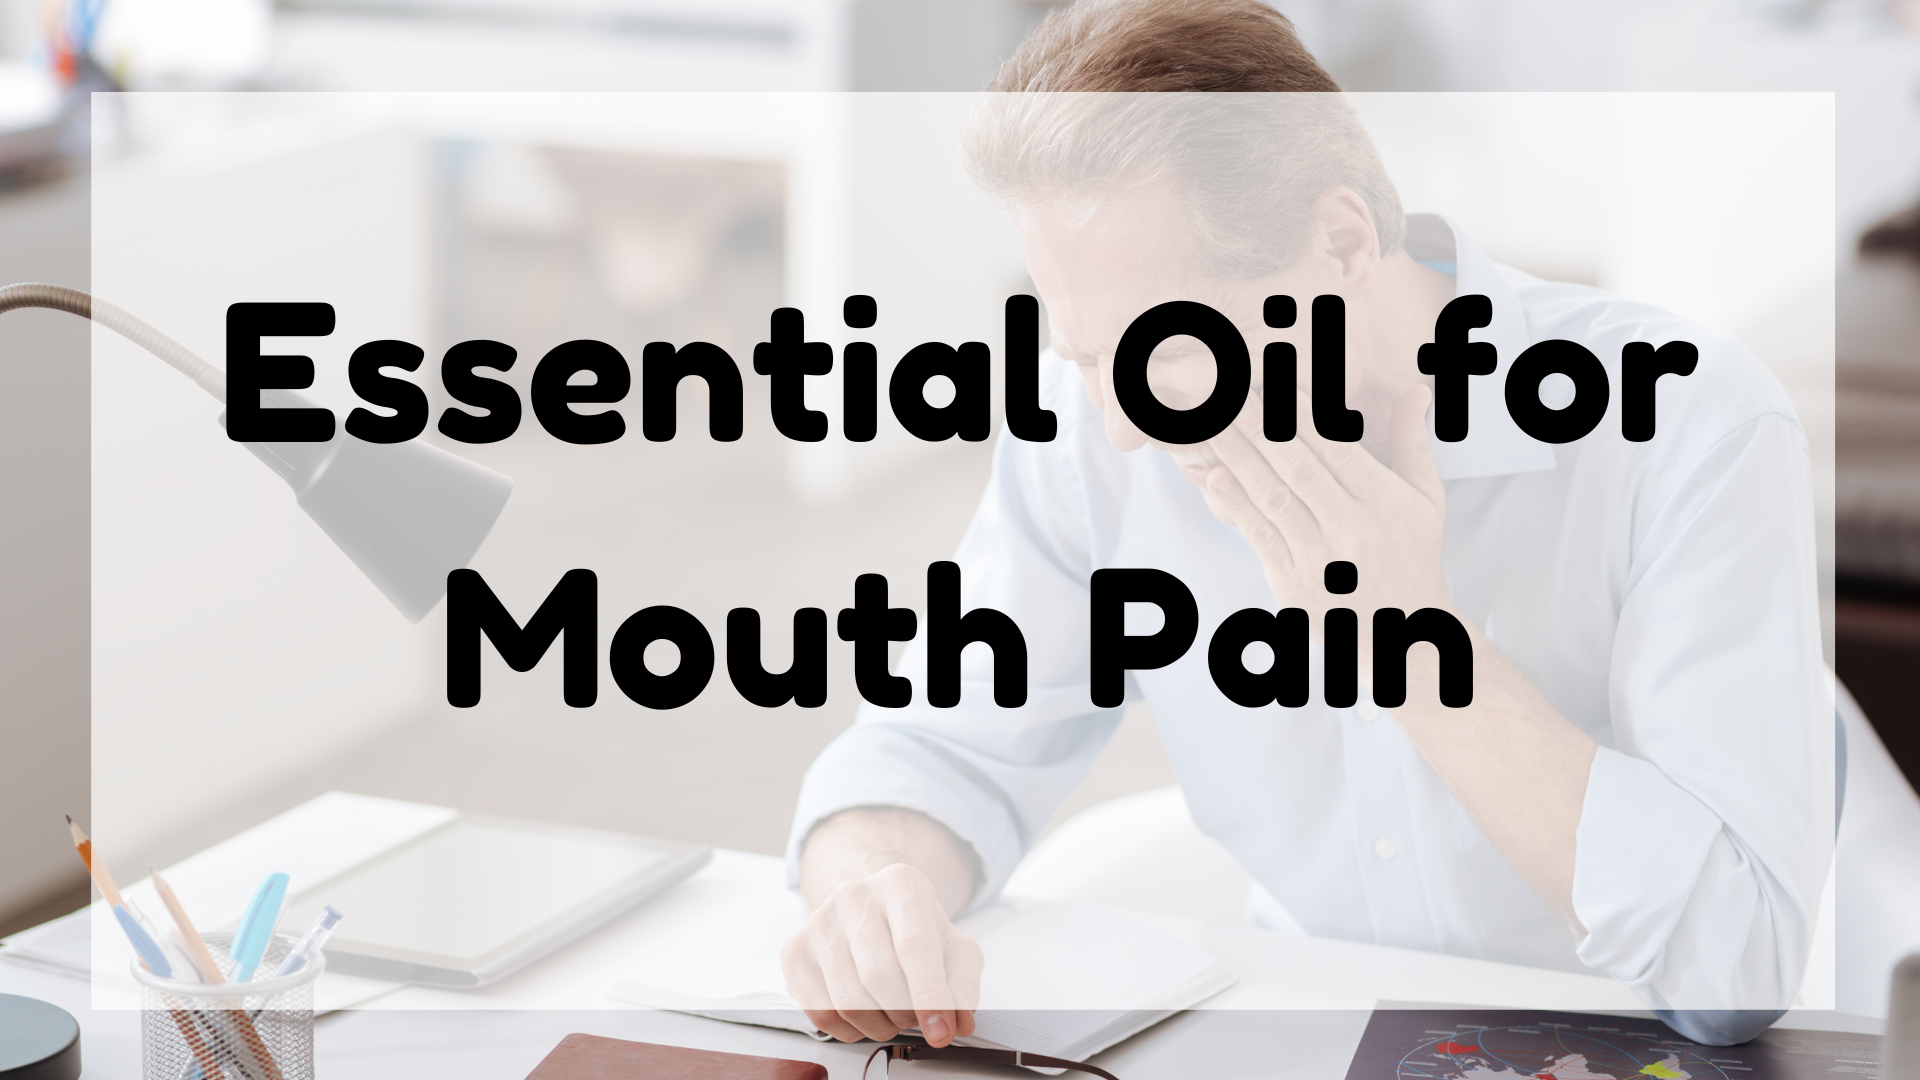 Essential Oil for Mouth Pain featured image